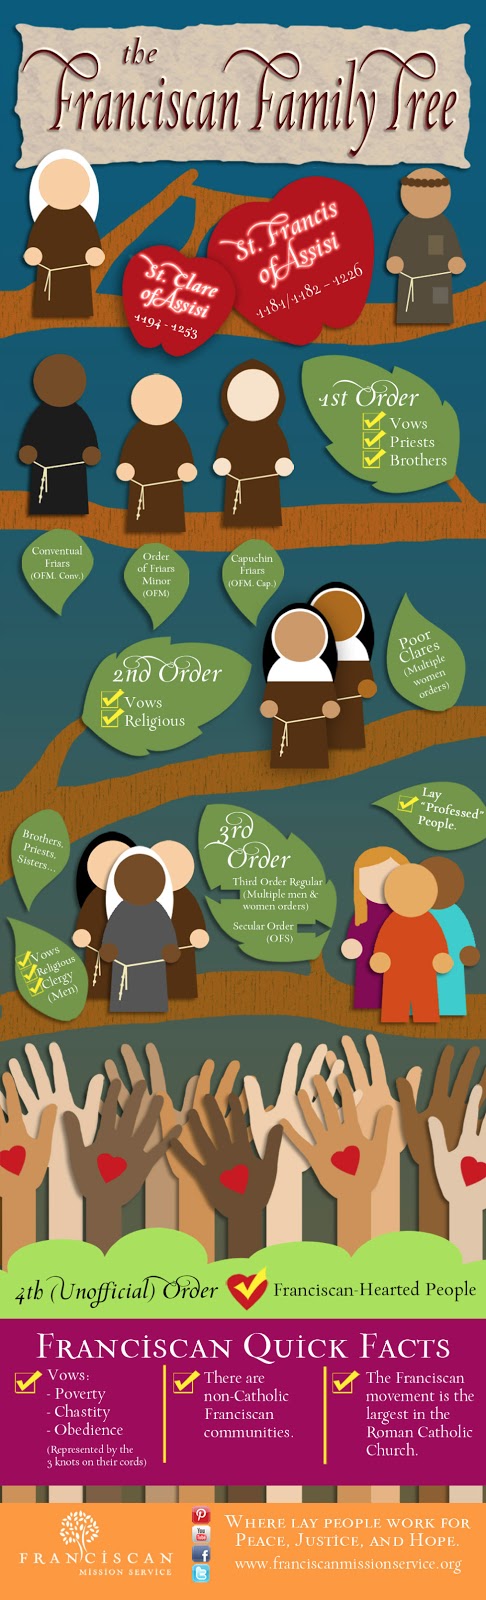 The Franciscan Family Tree